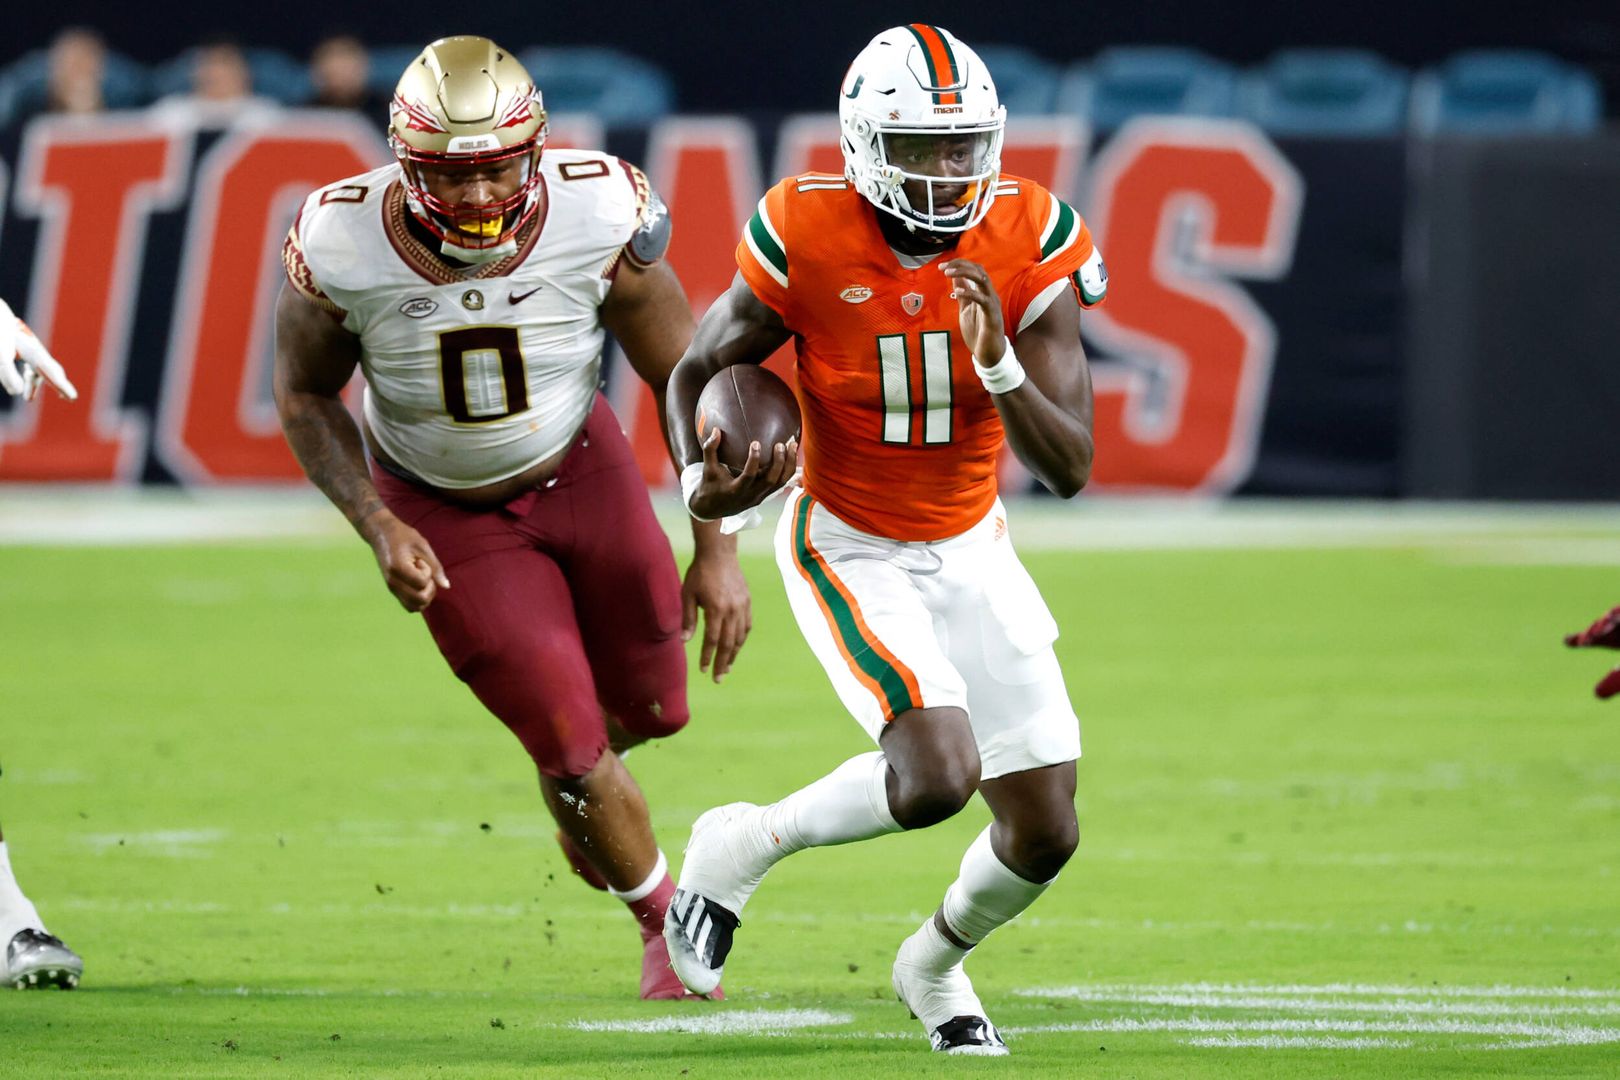 Canes Fall to Florida State